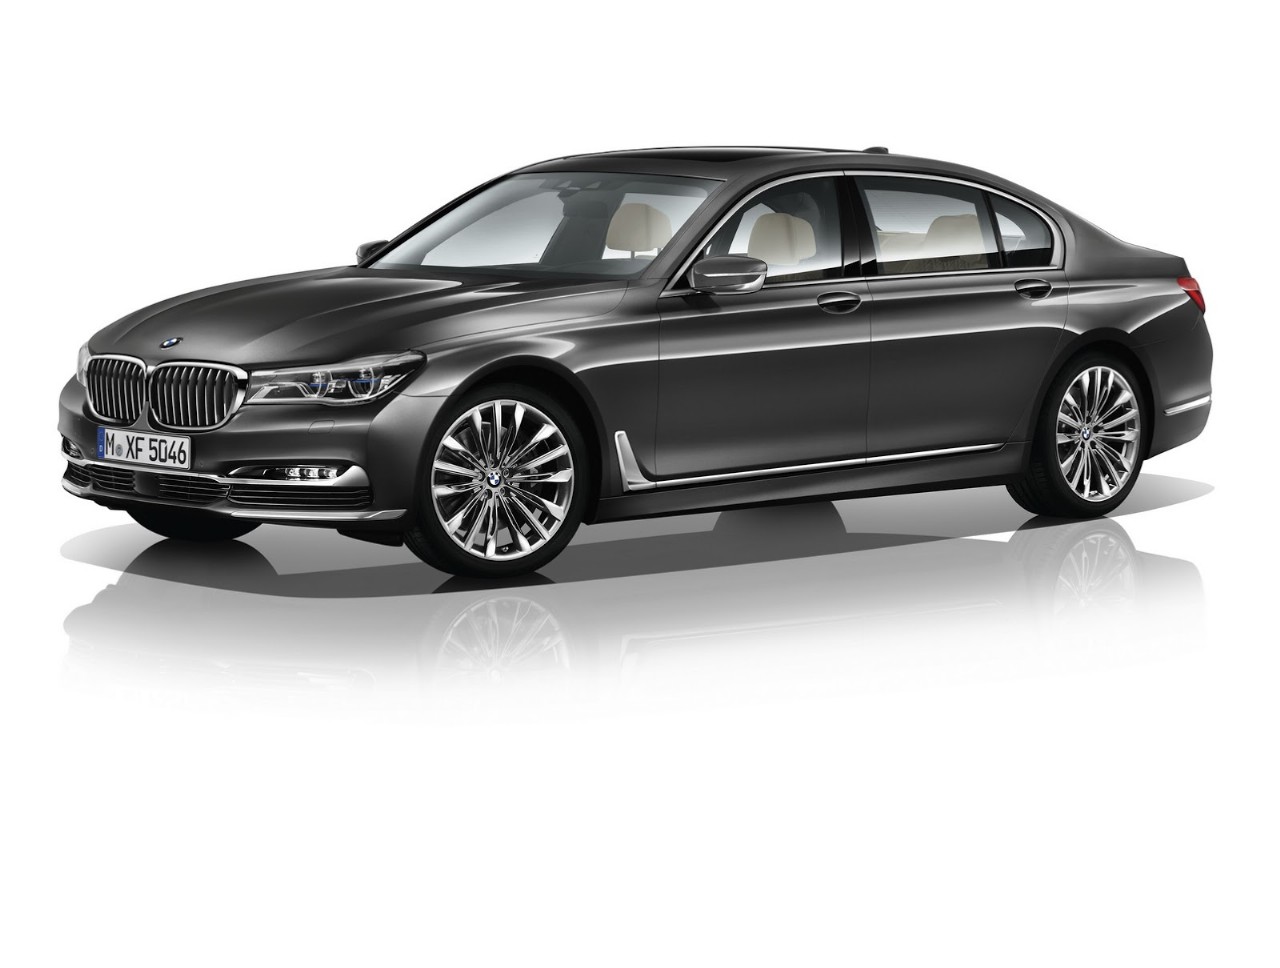 The BMW 725d Long Oil Capacity and type